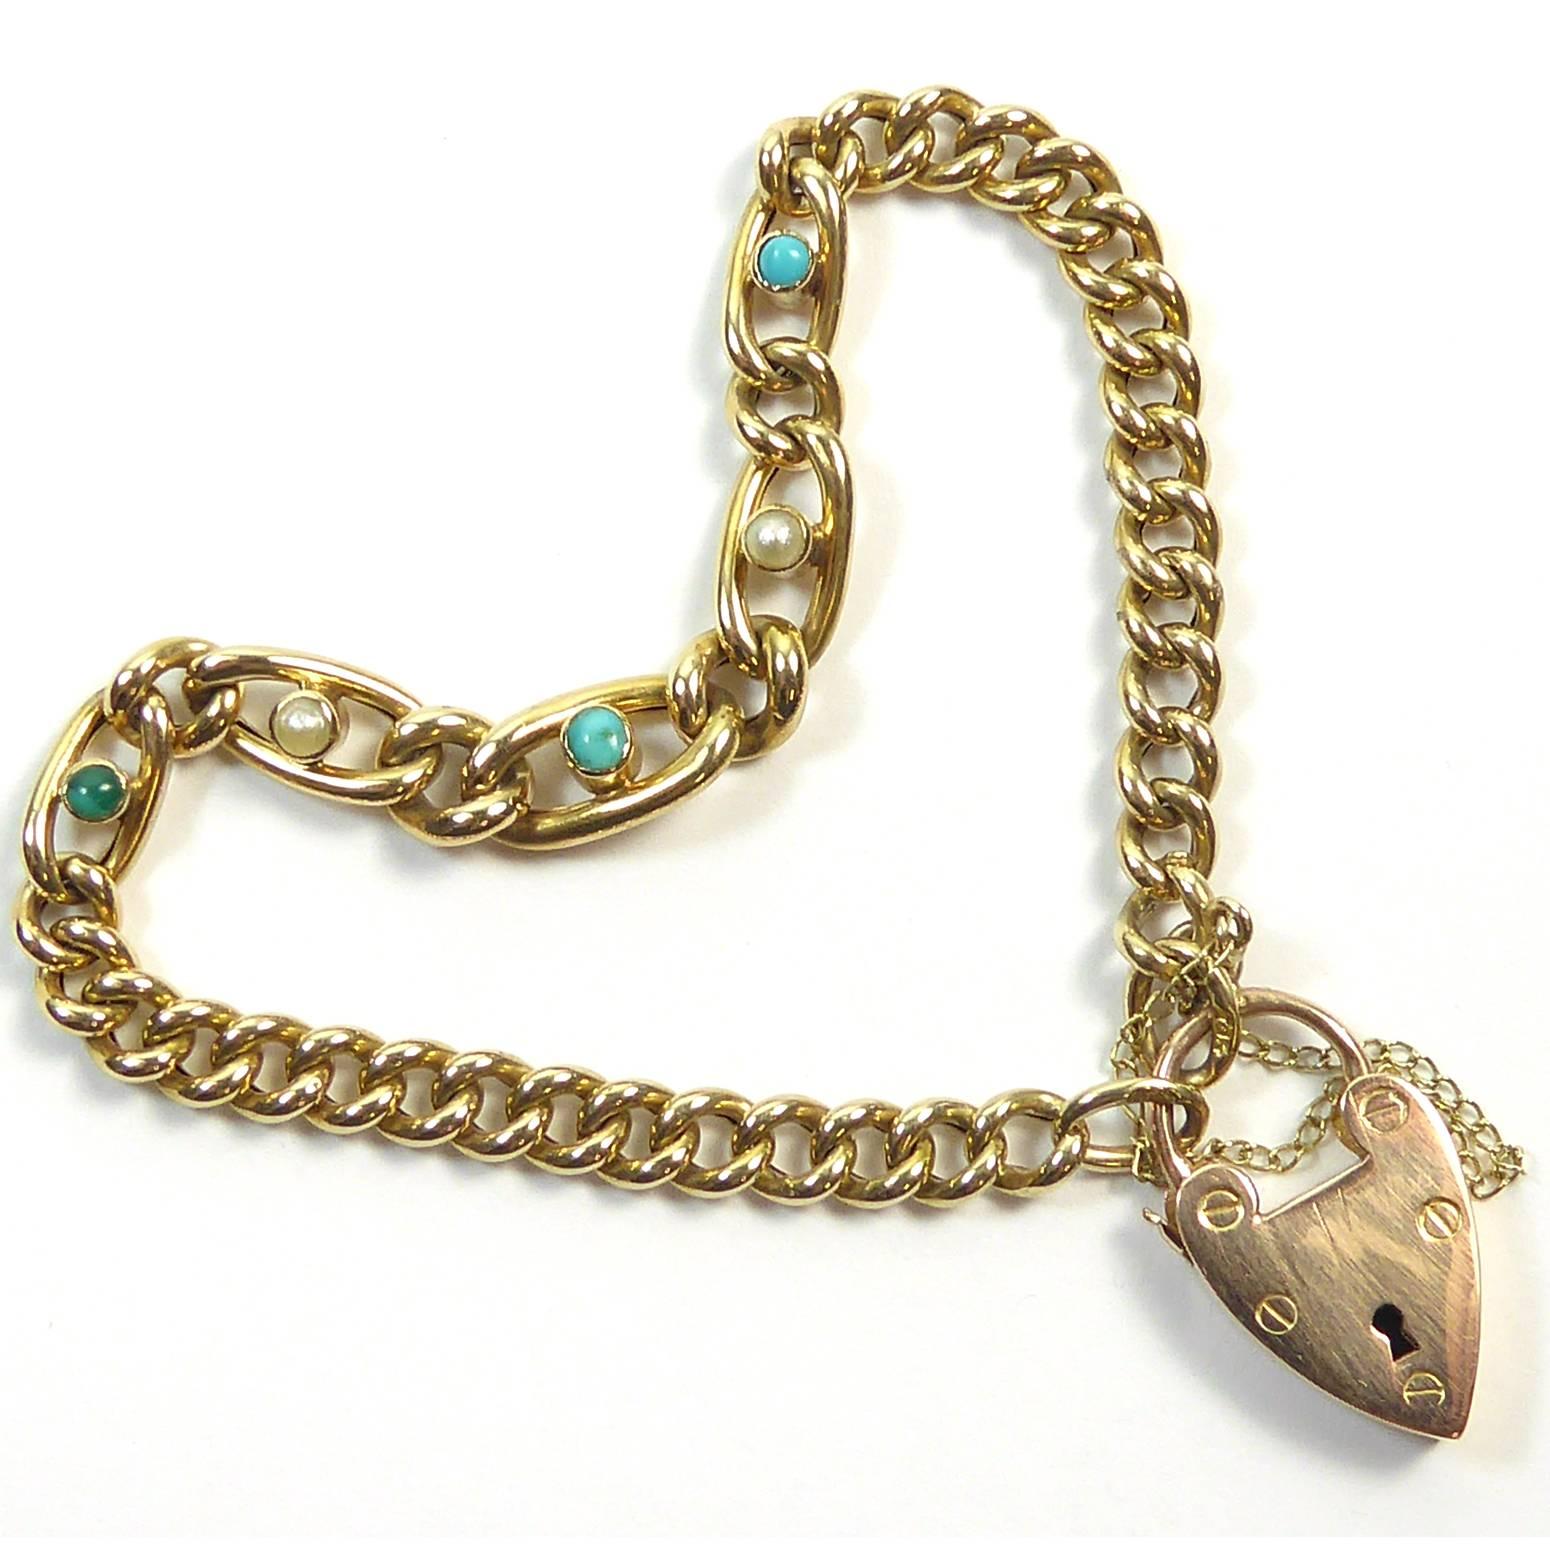 
    Late Victorian
    Graduate Curb Links
    Turquoise & Pearl Set
    Padlock
    Hallmarked 9ct gold London

A late Victorian curb style link bracelet crafted in 9ct gold.  A very pretty turquoise and pearl set centre panel lifts the design